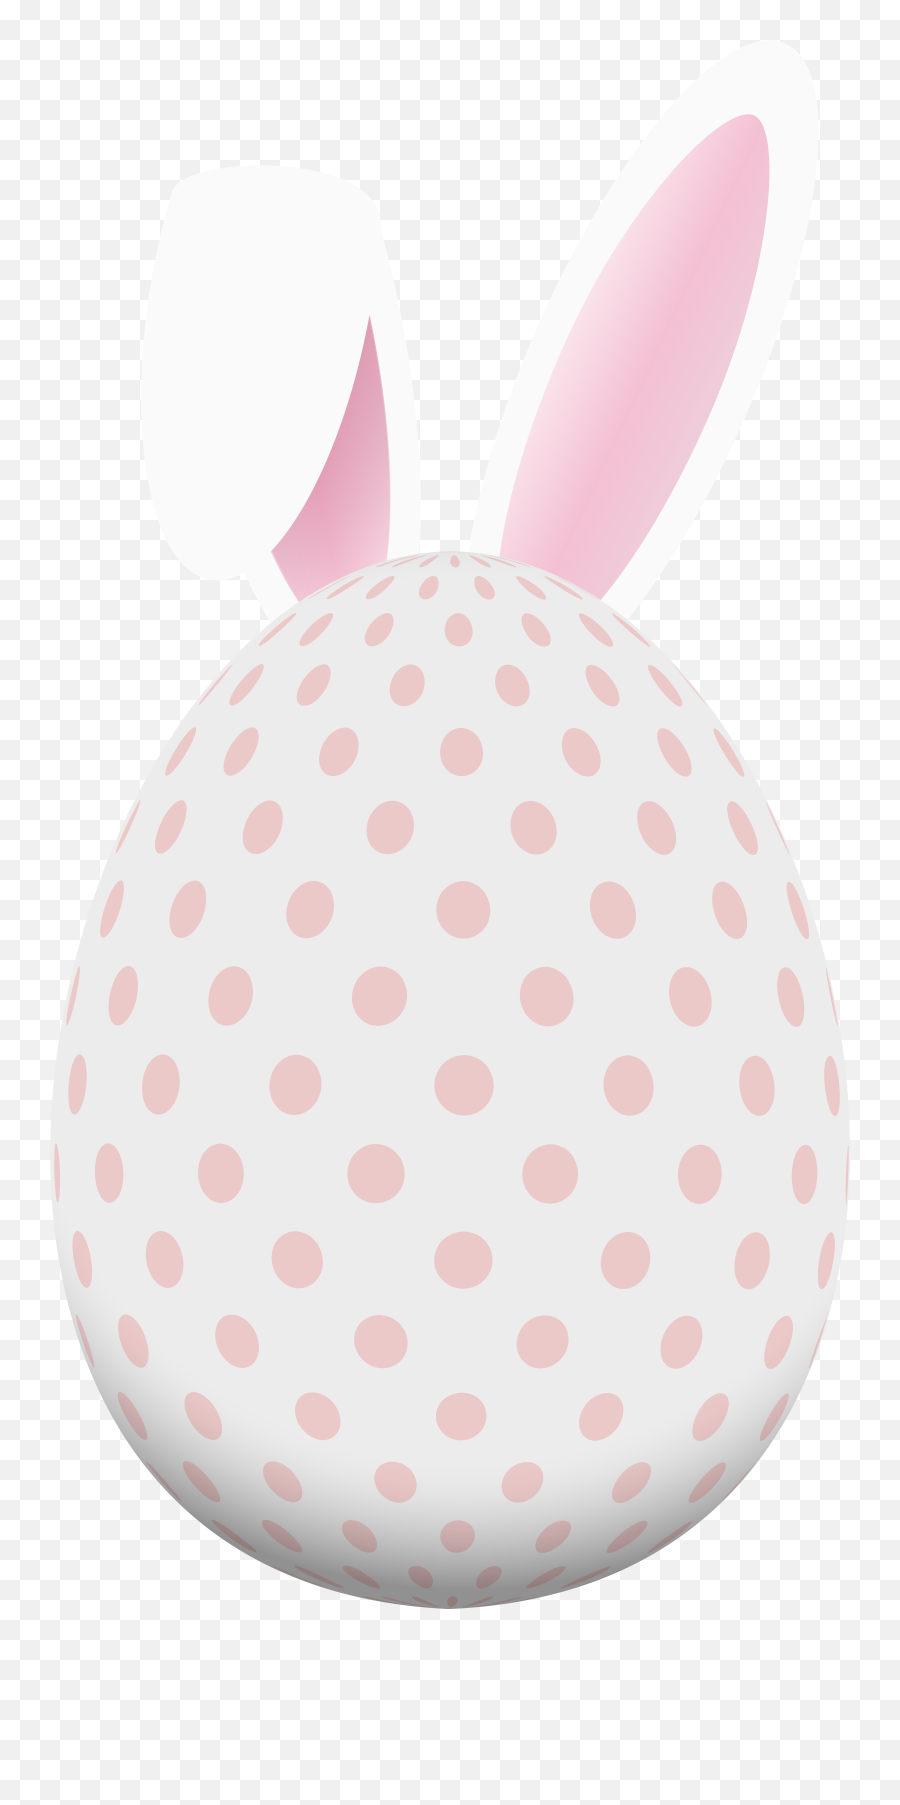 Bunny Png Egg With Clip Royalty Free Emoji,What Is The Emoji Bunny And Egg